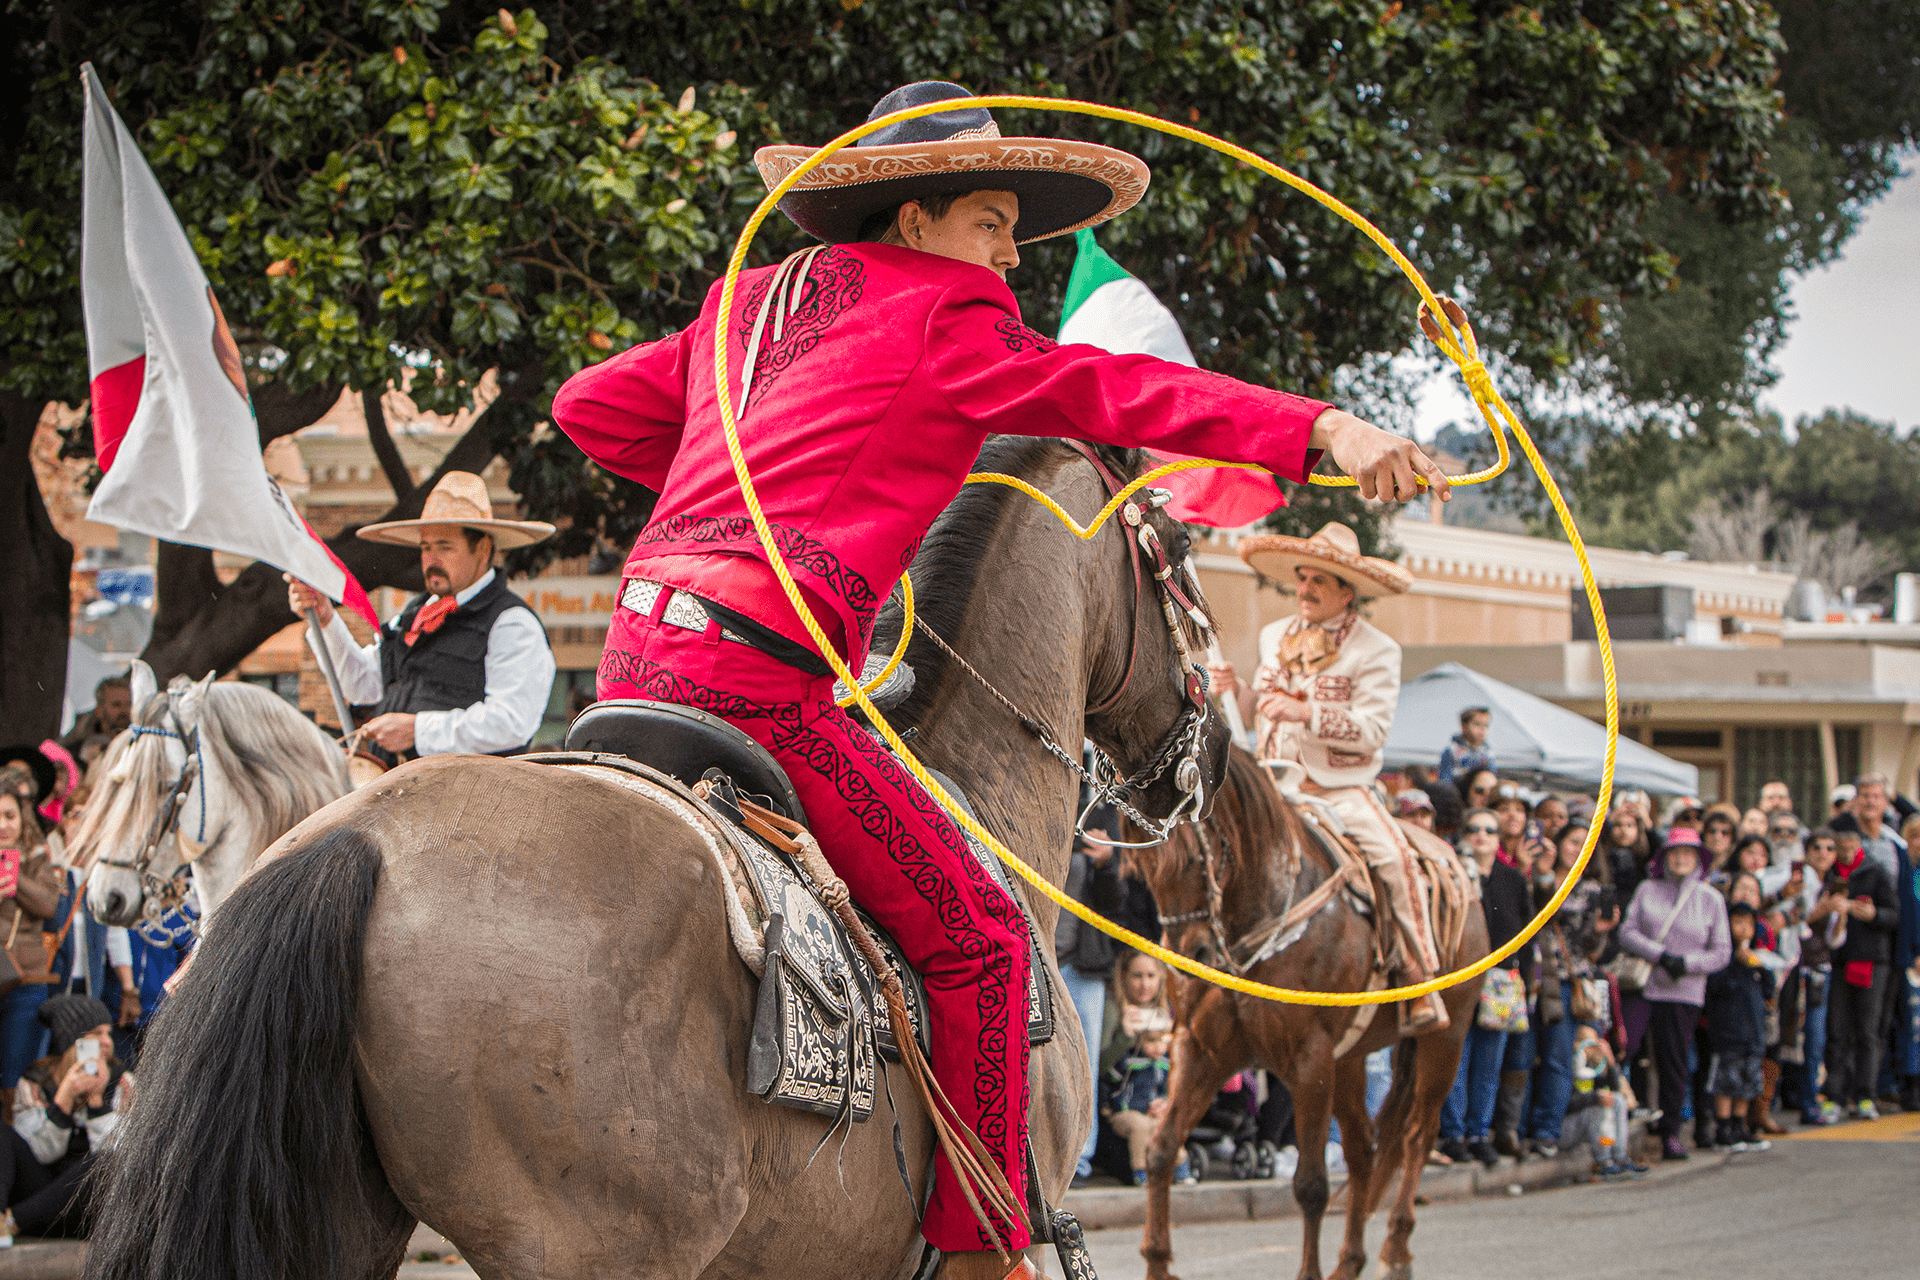 Image of man riding a dancing horse and swinging a lasso in front of on looking crowd - Photo by Keith Bergher